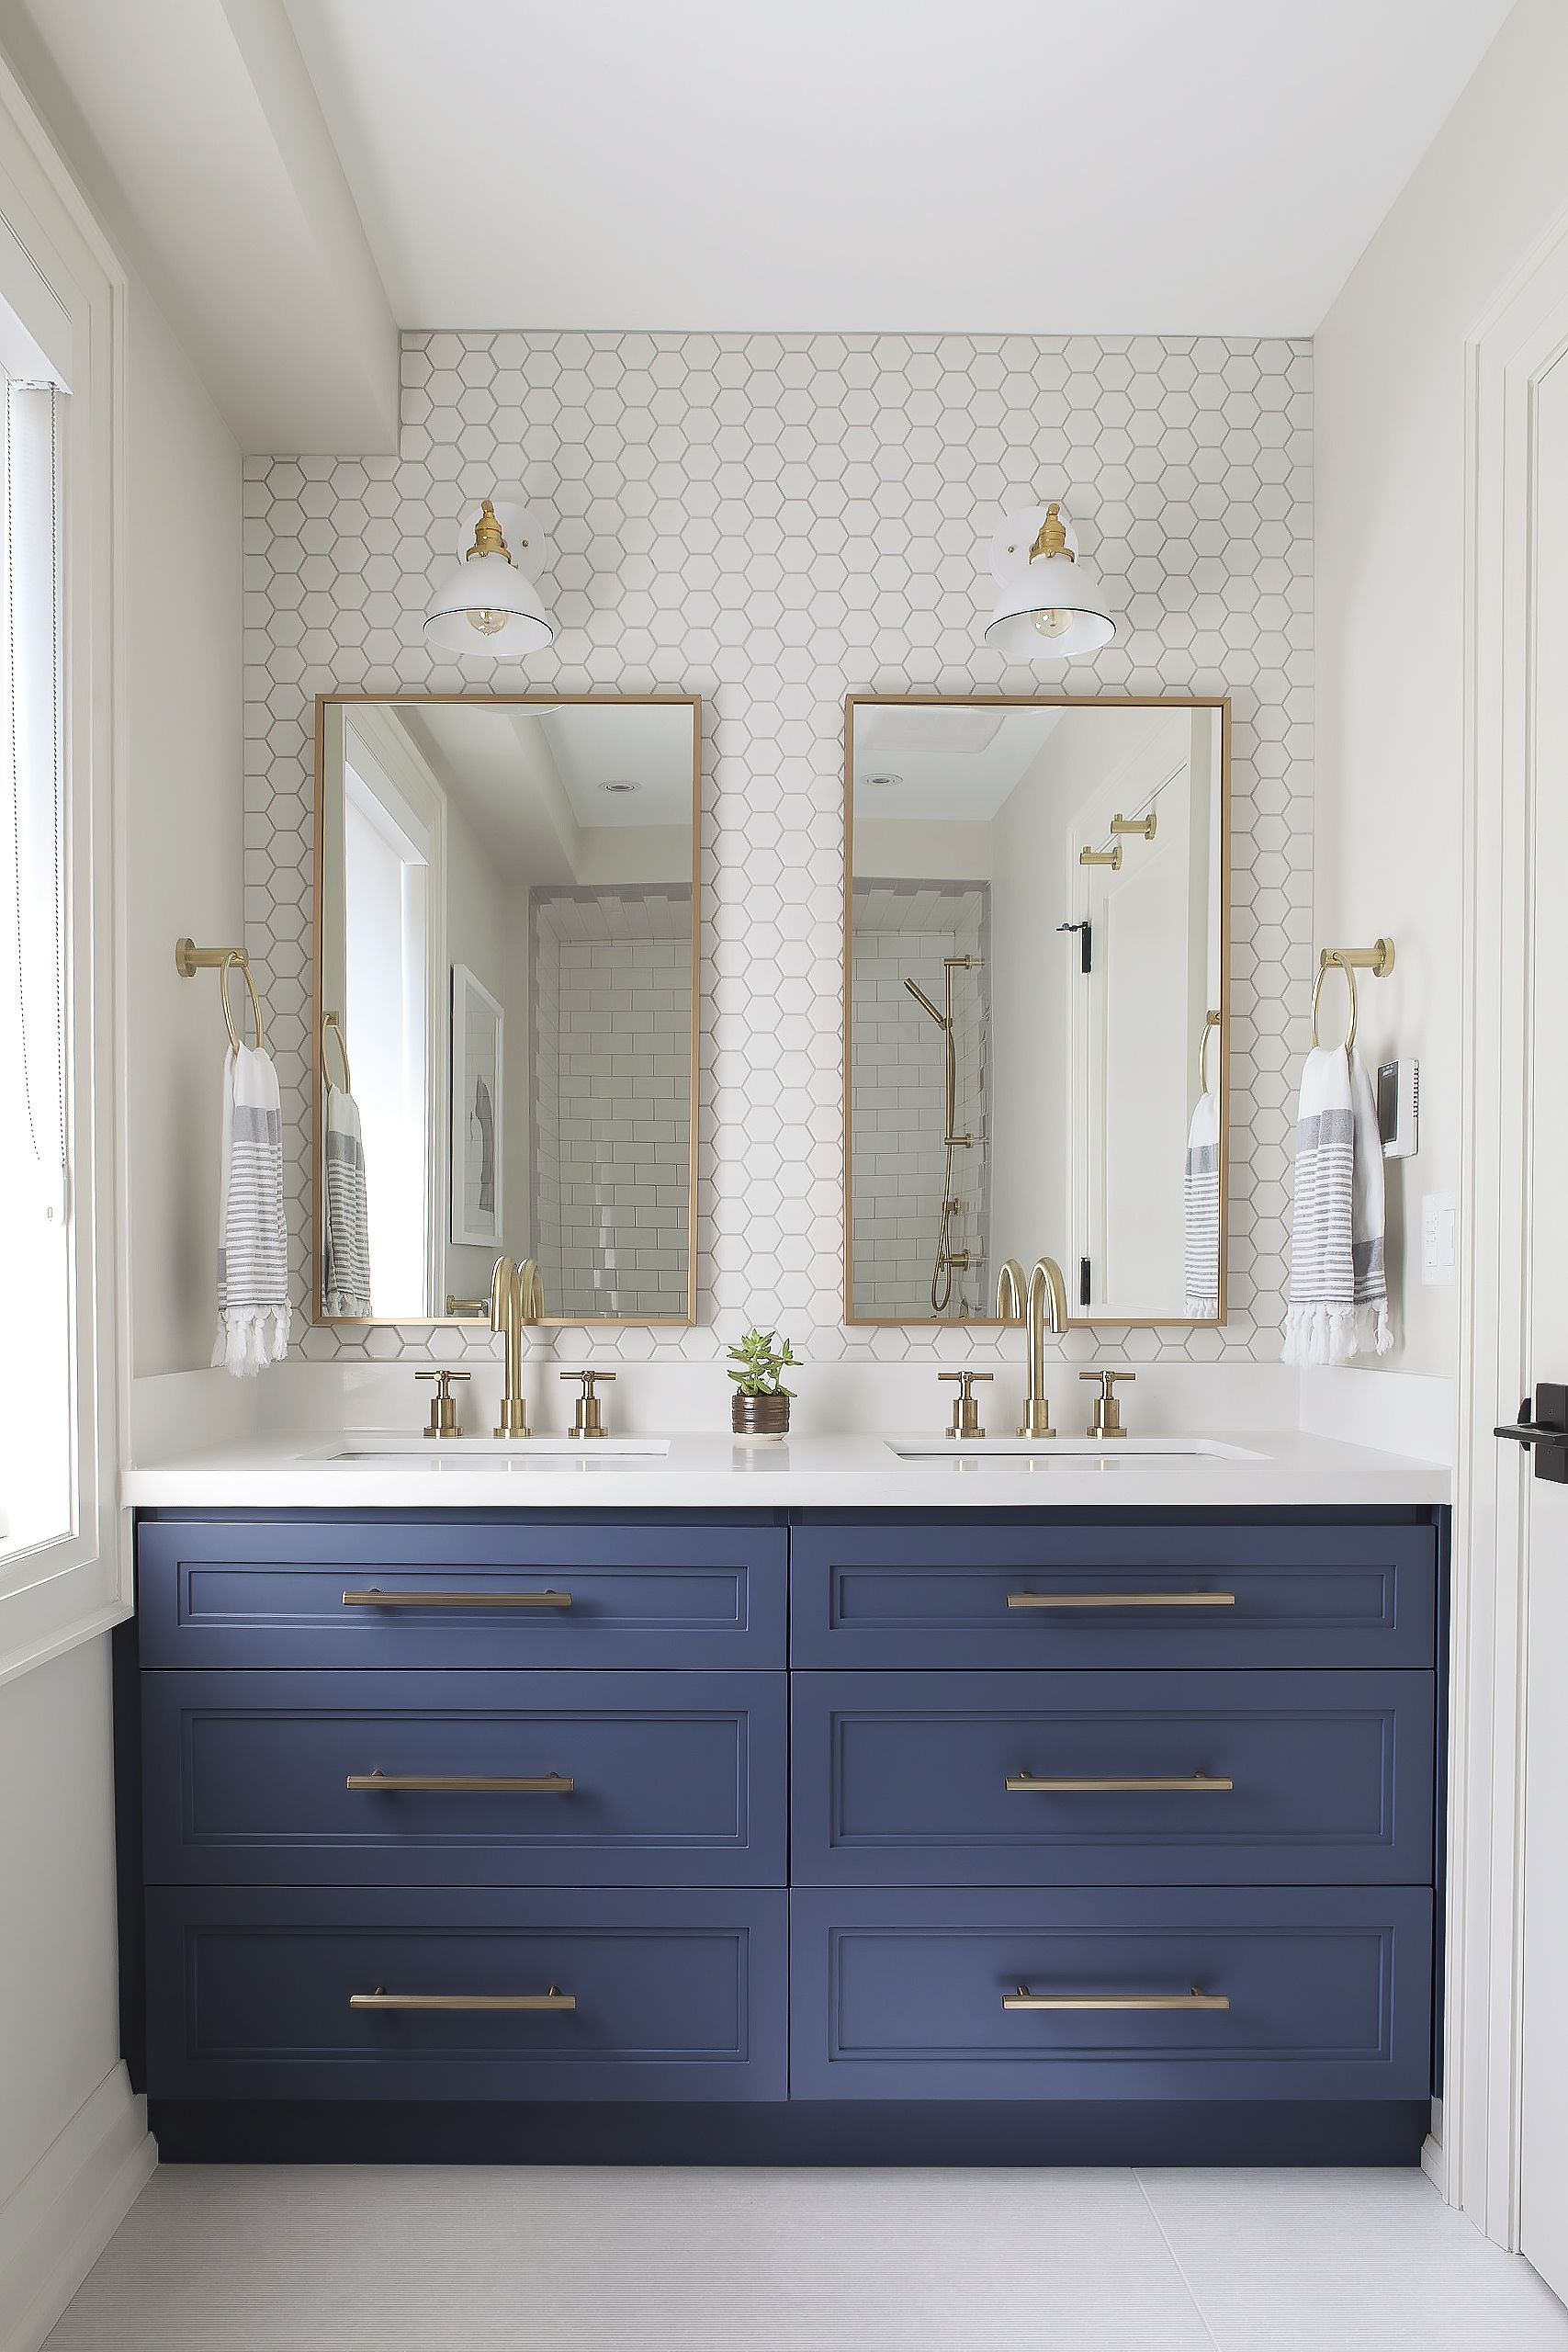 Deep blue painted cabinets in an otherwise all white bathroom. I also love the h…